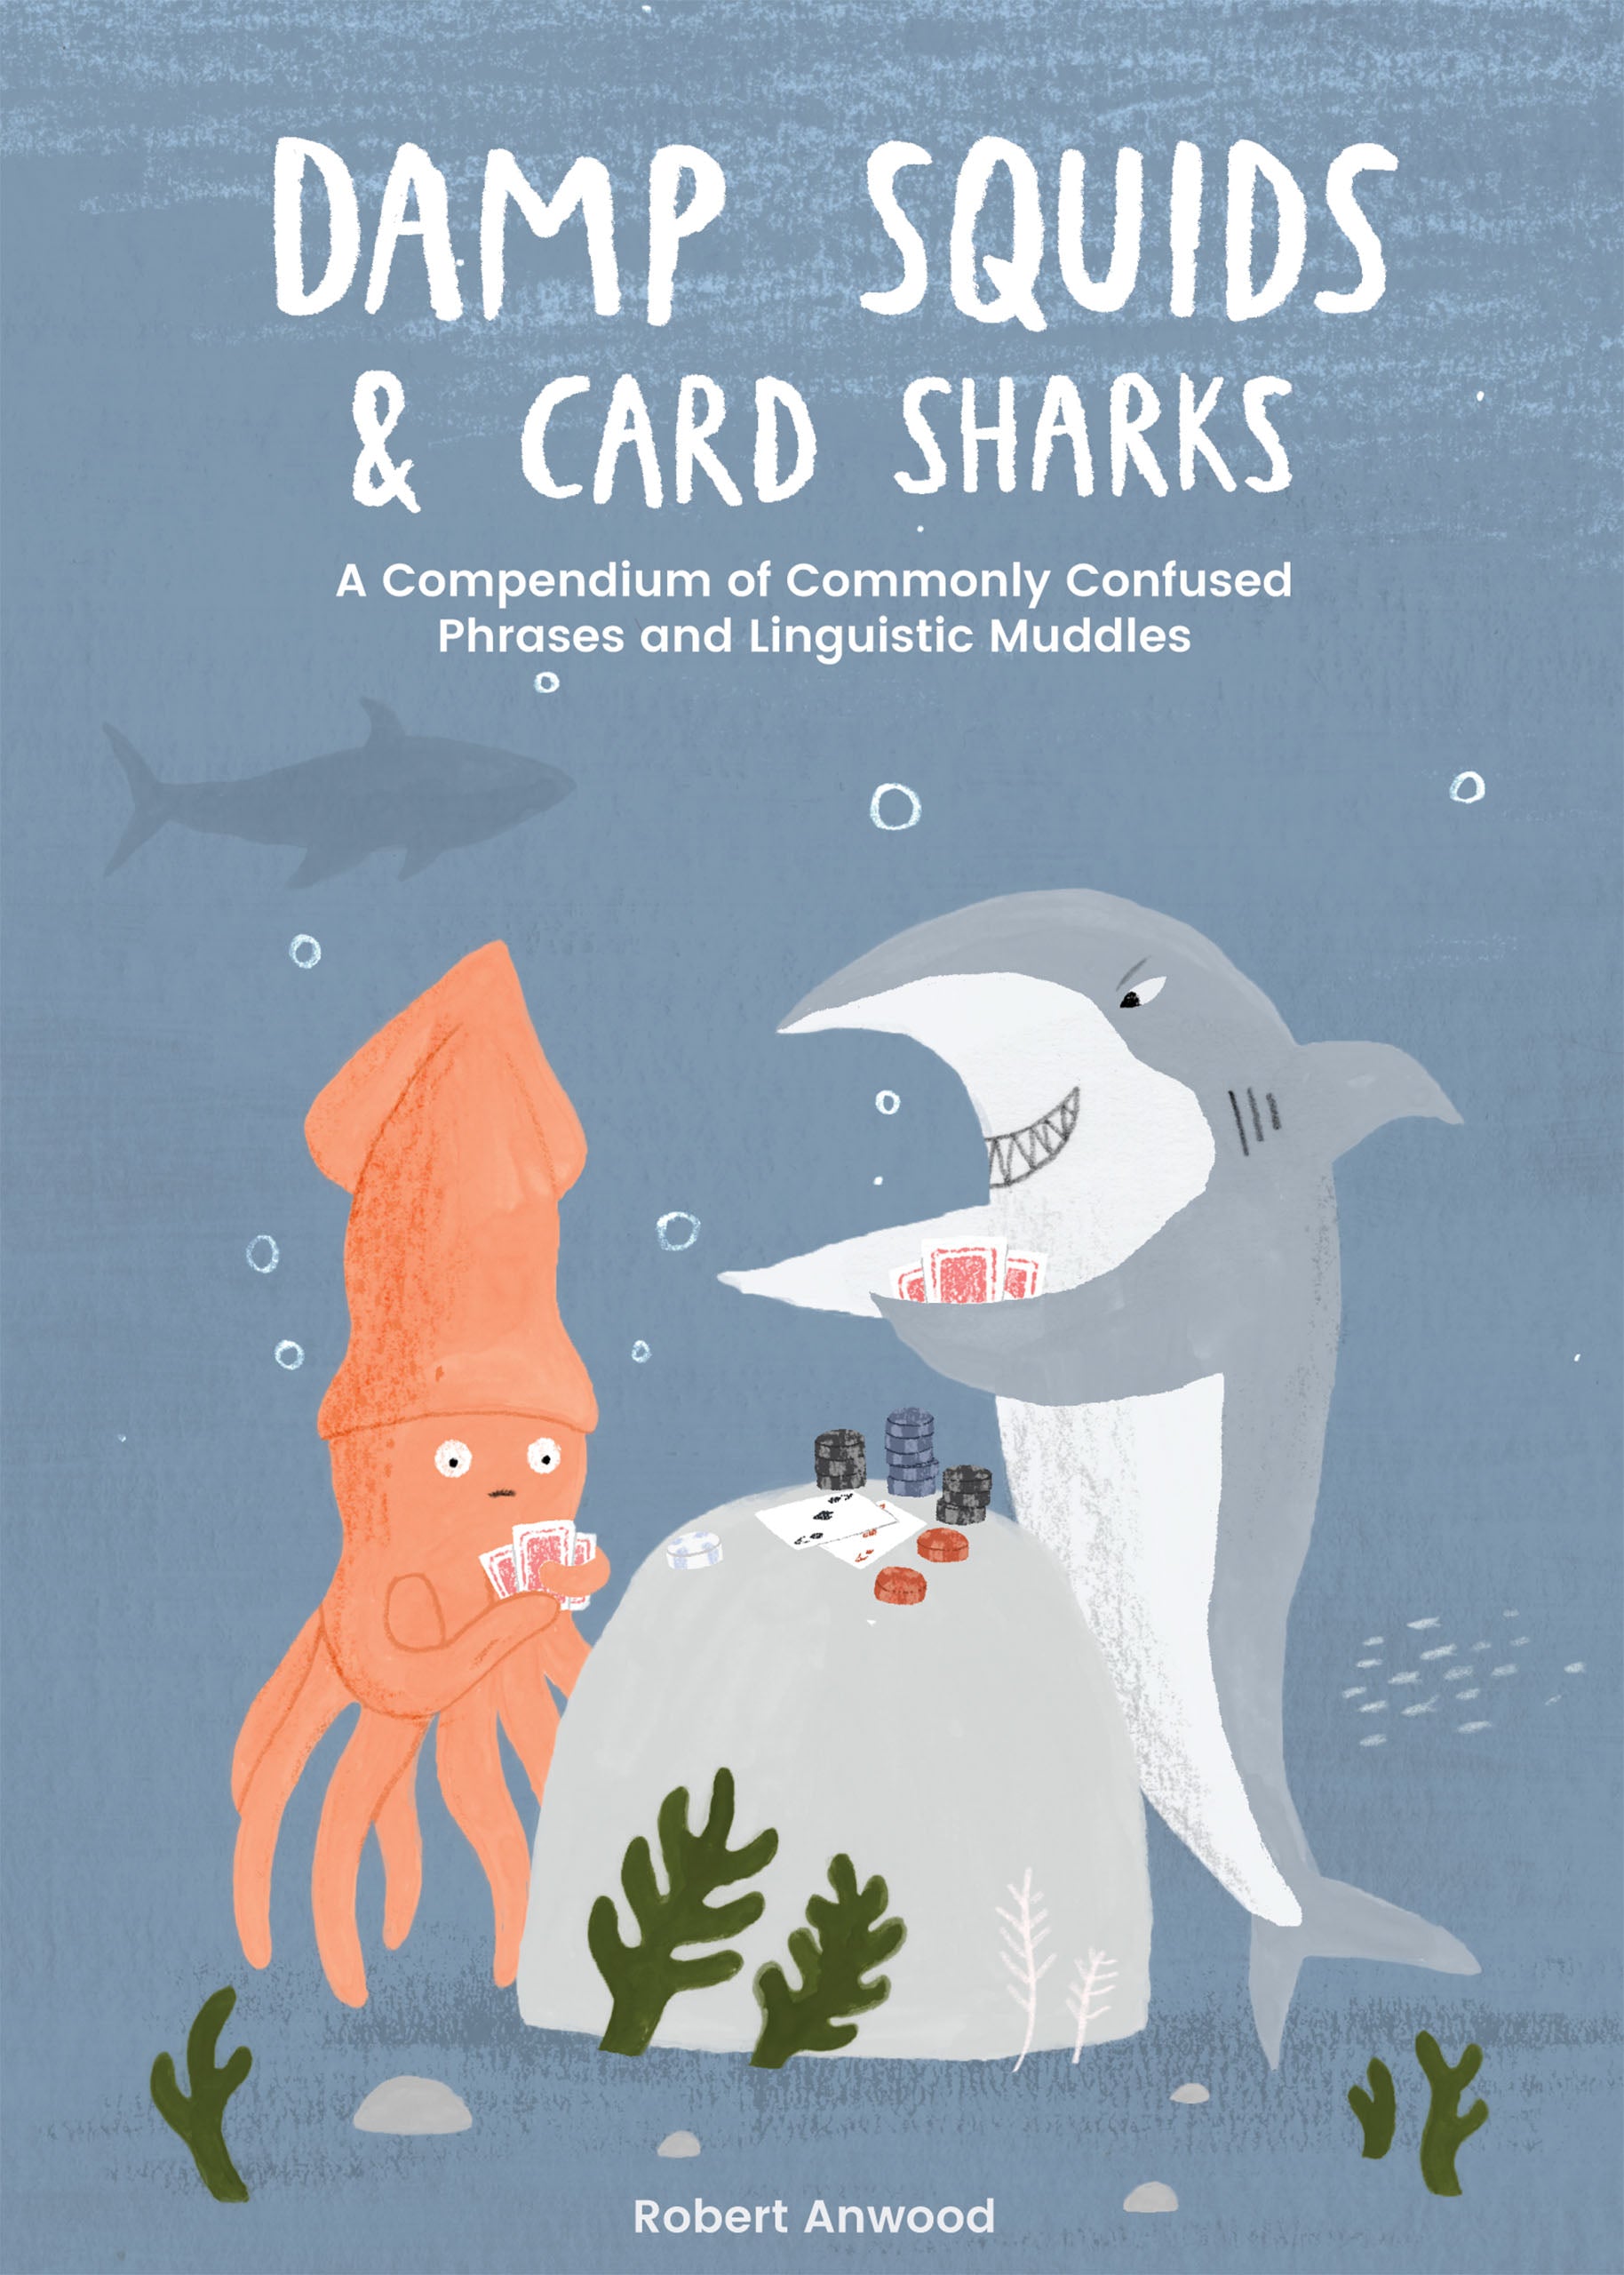 Damp Squids and Card Sharks: A Compendium of Commonly Confused Phrases and Linguistic Muddles